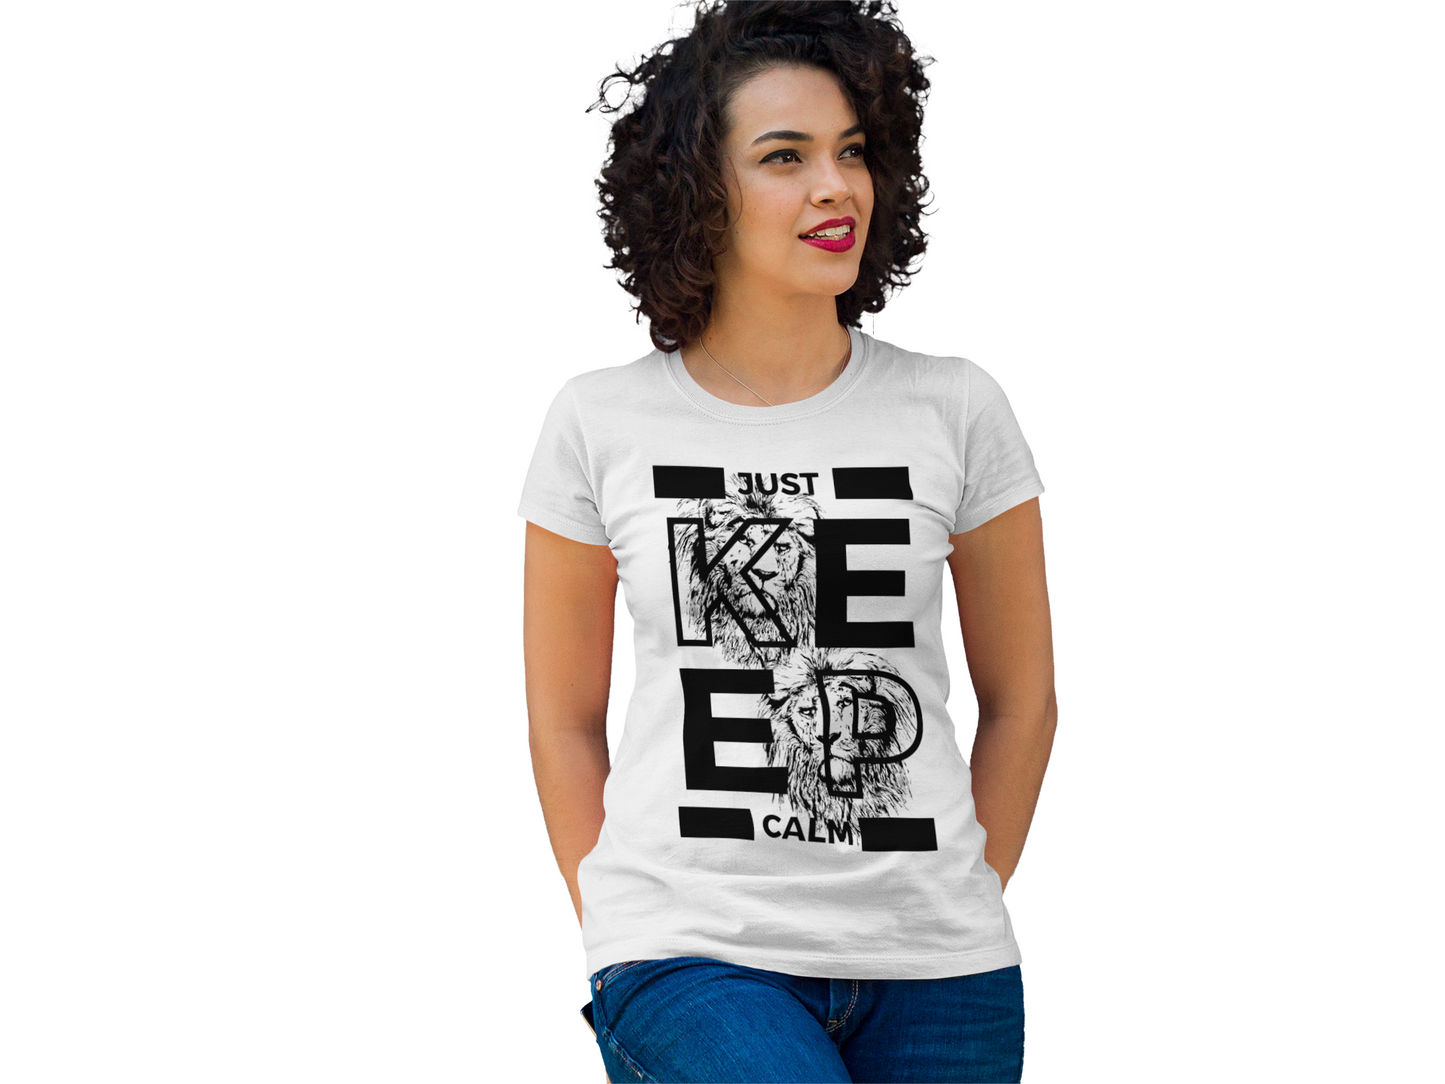 transparent-t-shirt-mockup-of-a-woman-with-slick-curly-hair